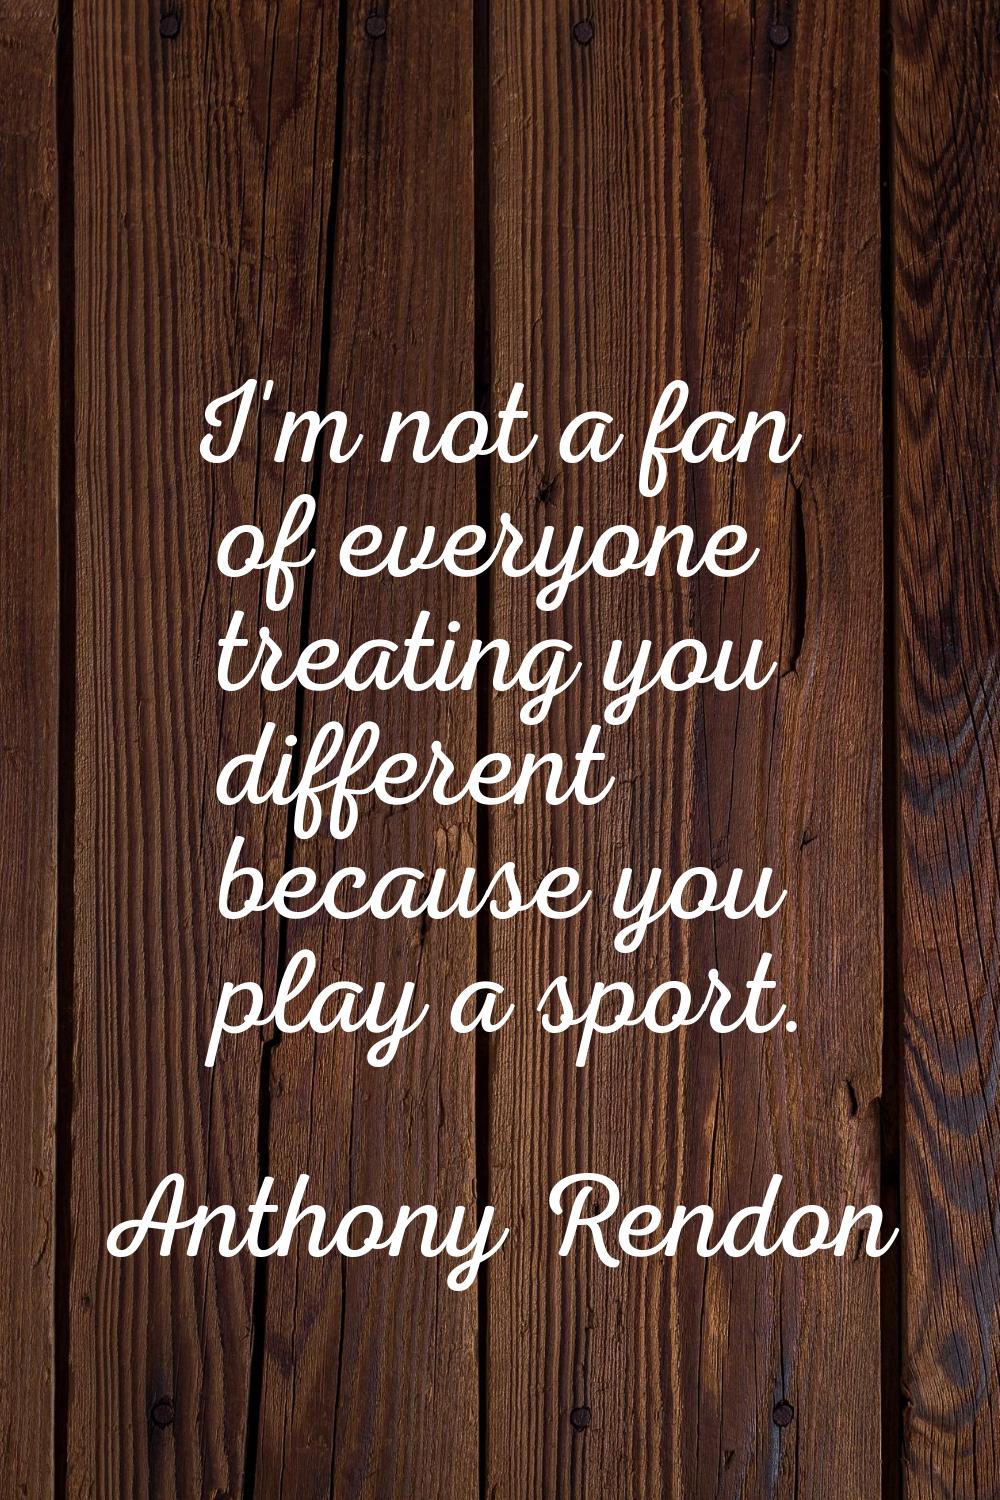 I'm not a fan of everyone treating you different because you play a sport.